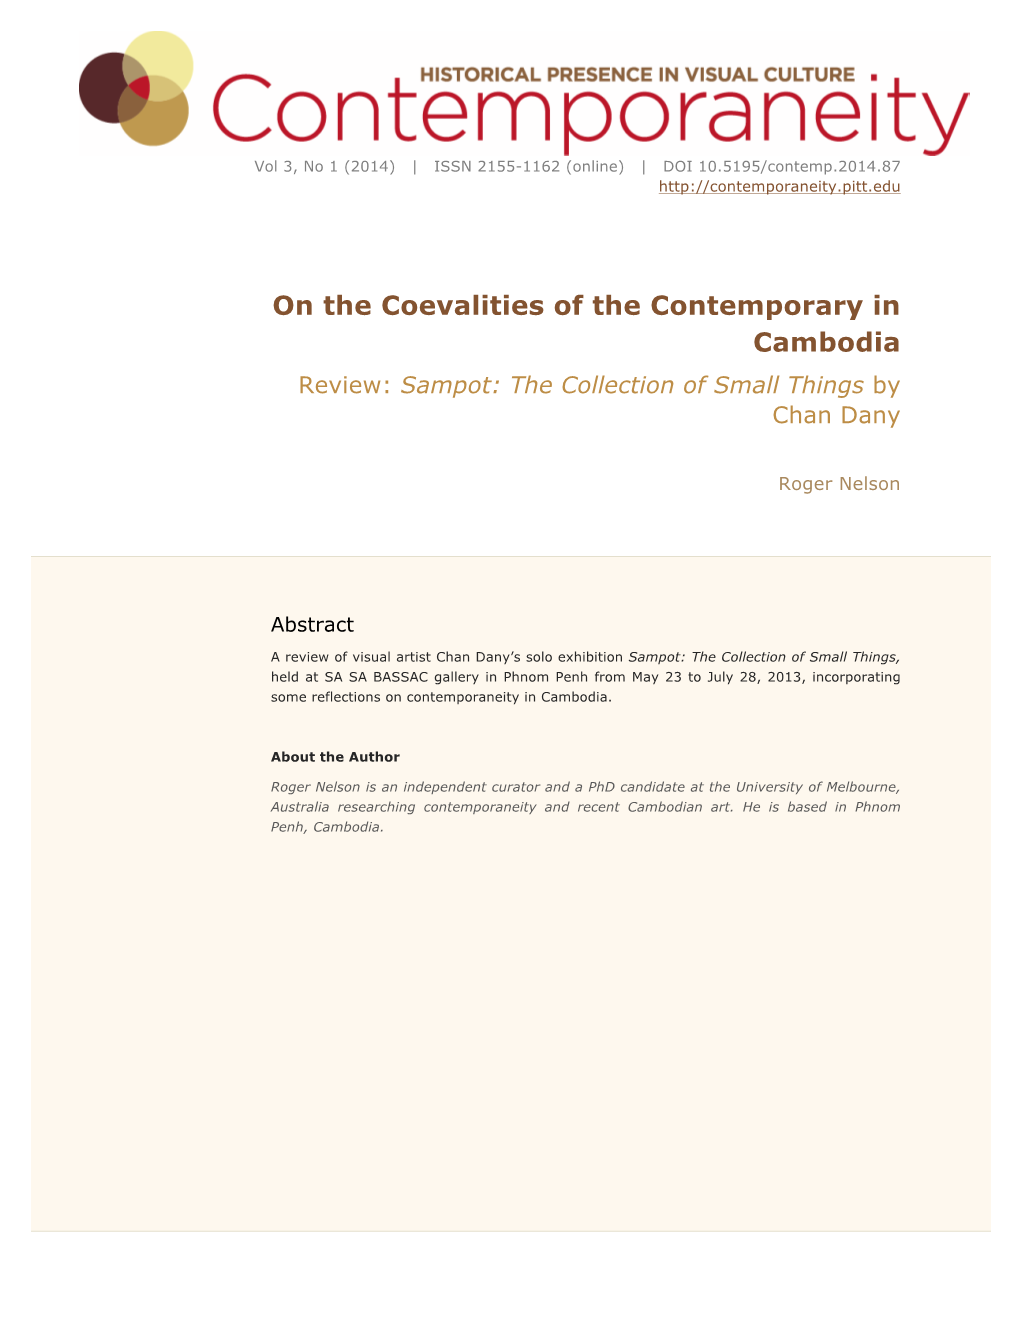 On the Coevalities of the Contemporary in Cambodia Review: Sampot: the Collection of Small Things by Chan Dany